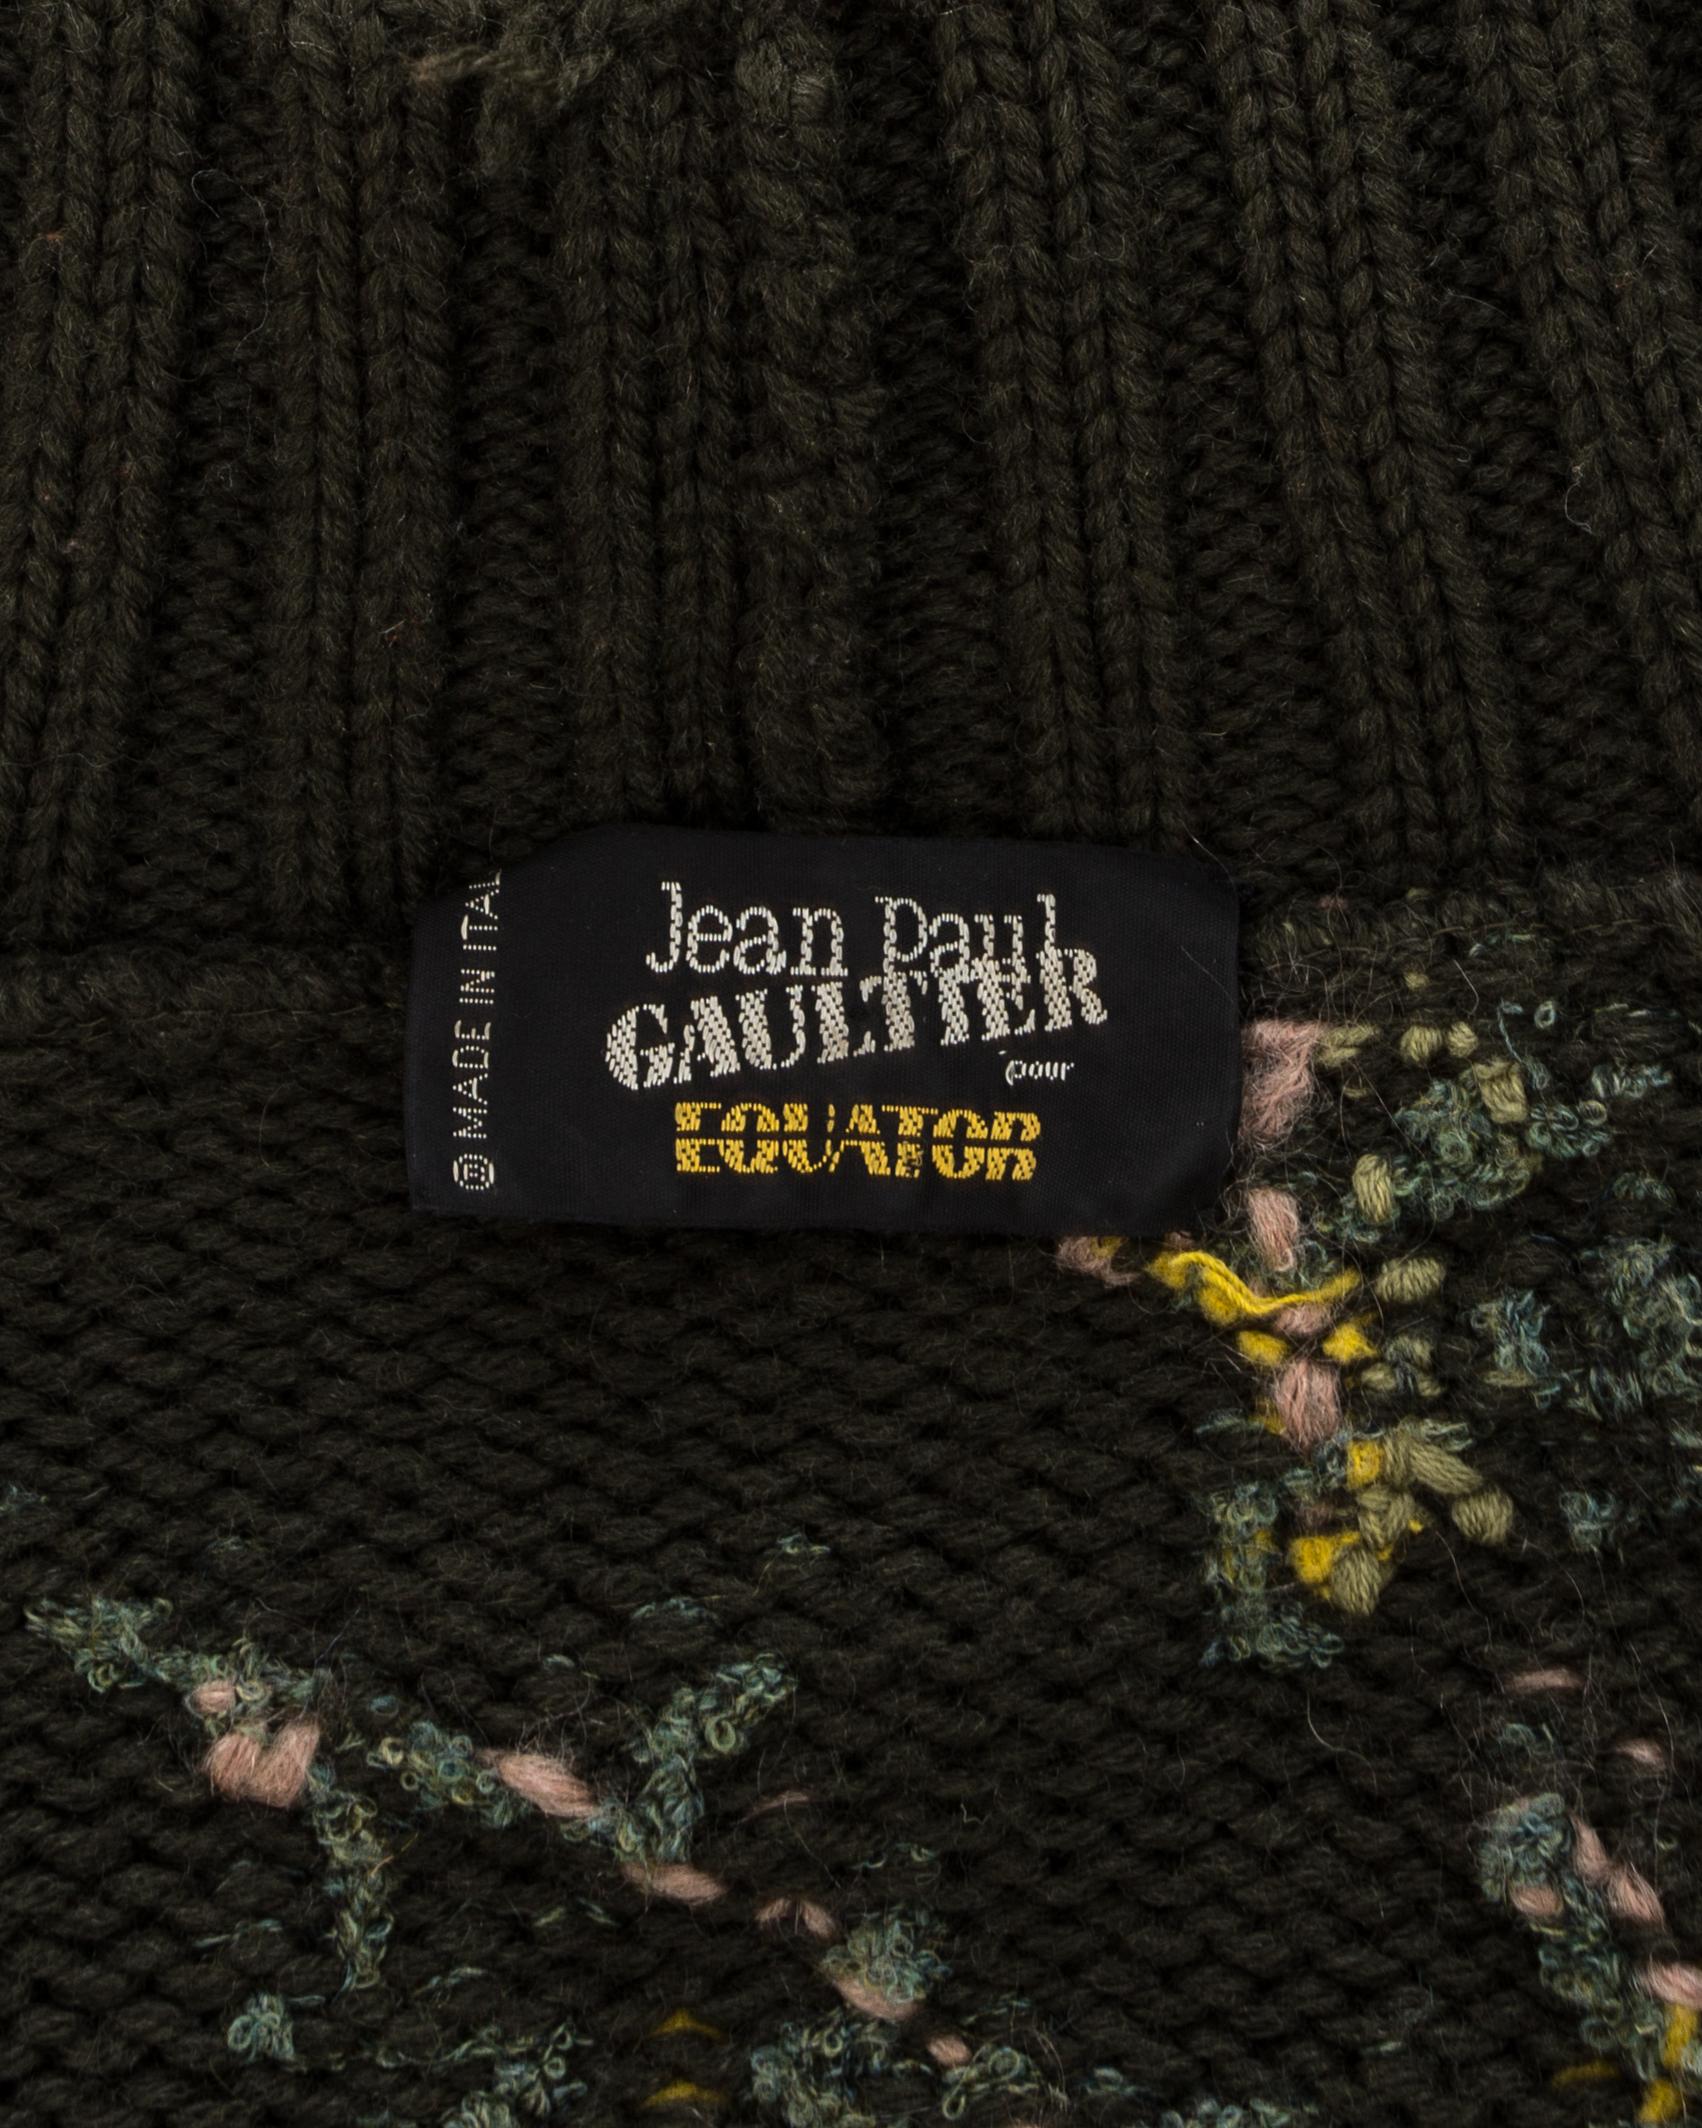 Jean Paul Gaultier knitted wool floral tapestry sweater and skirt set, fw 1984 For Sale 2